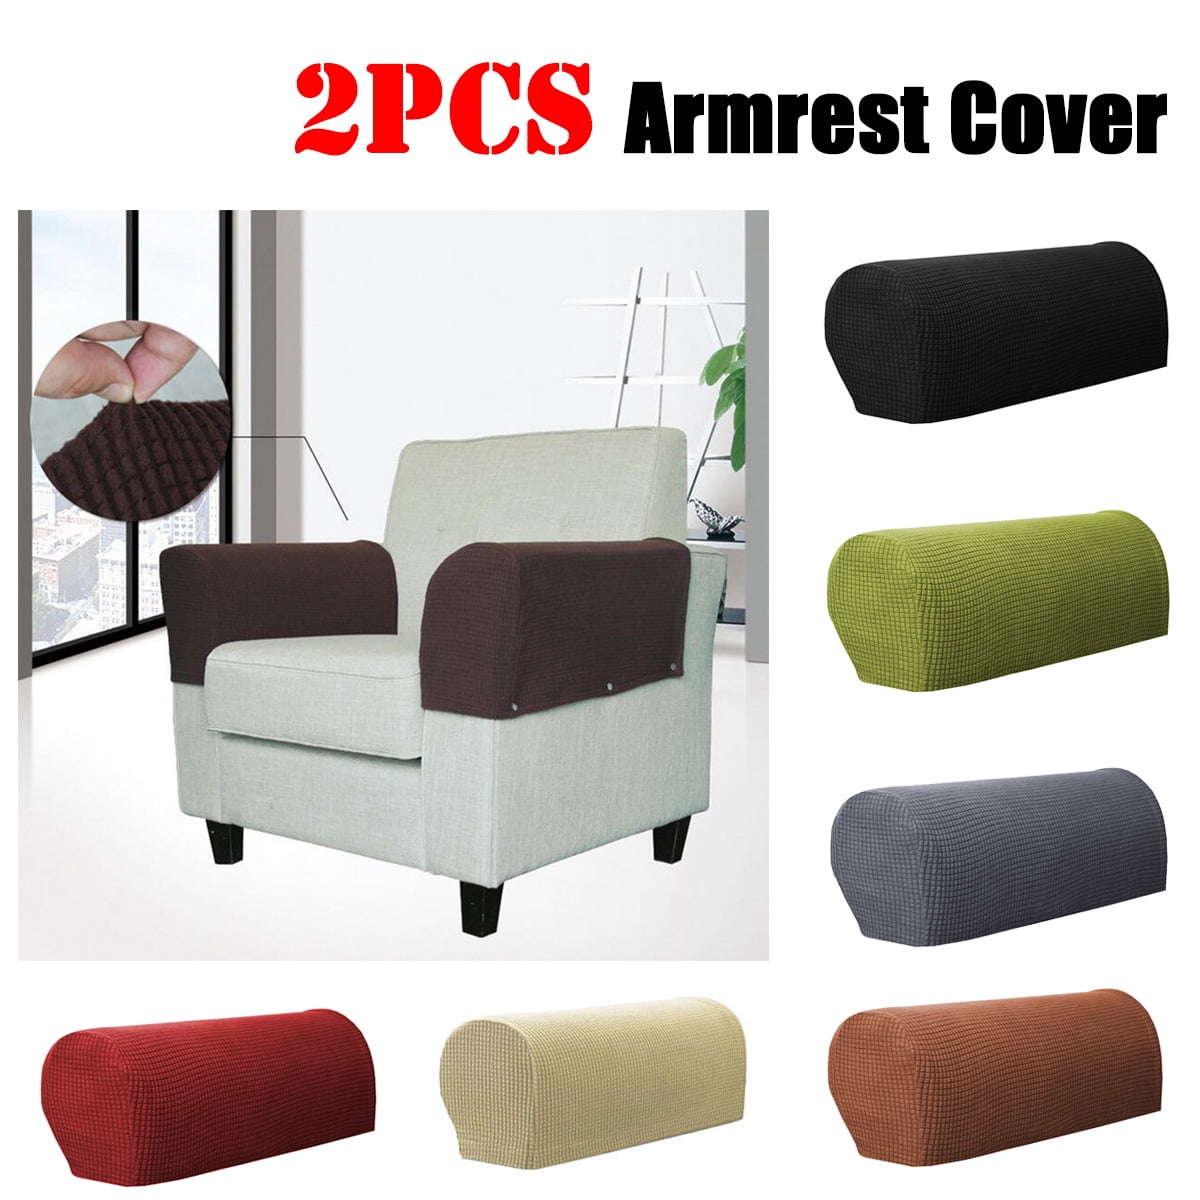 2PCS Premium Furniture Armrest Cover Sofa Couch Chair Arm Protectors Stretchy 